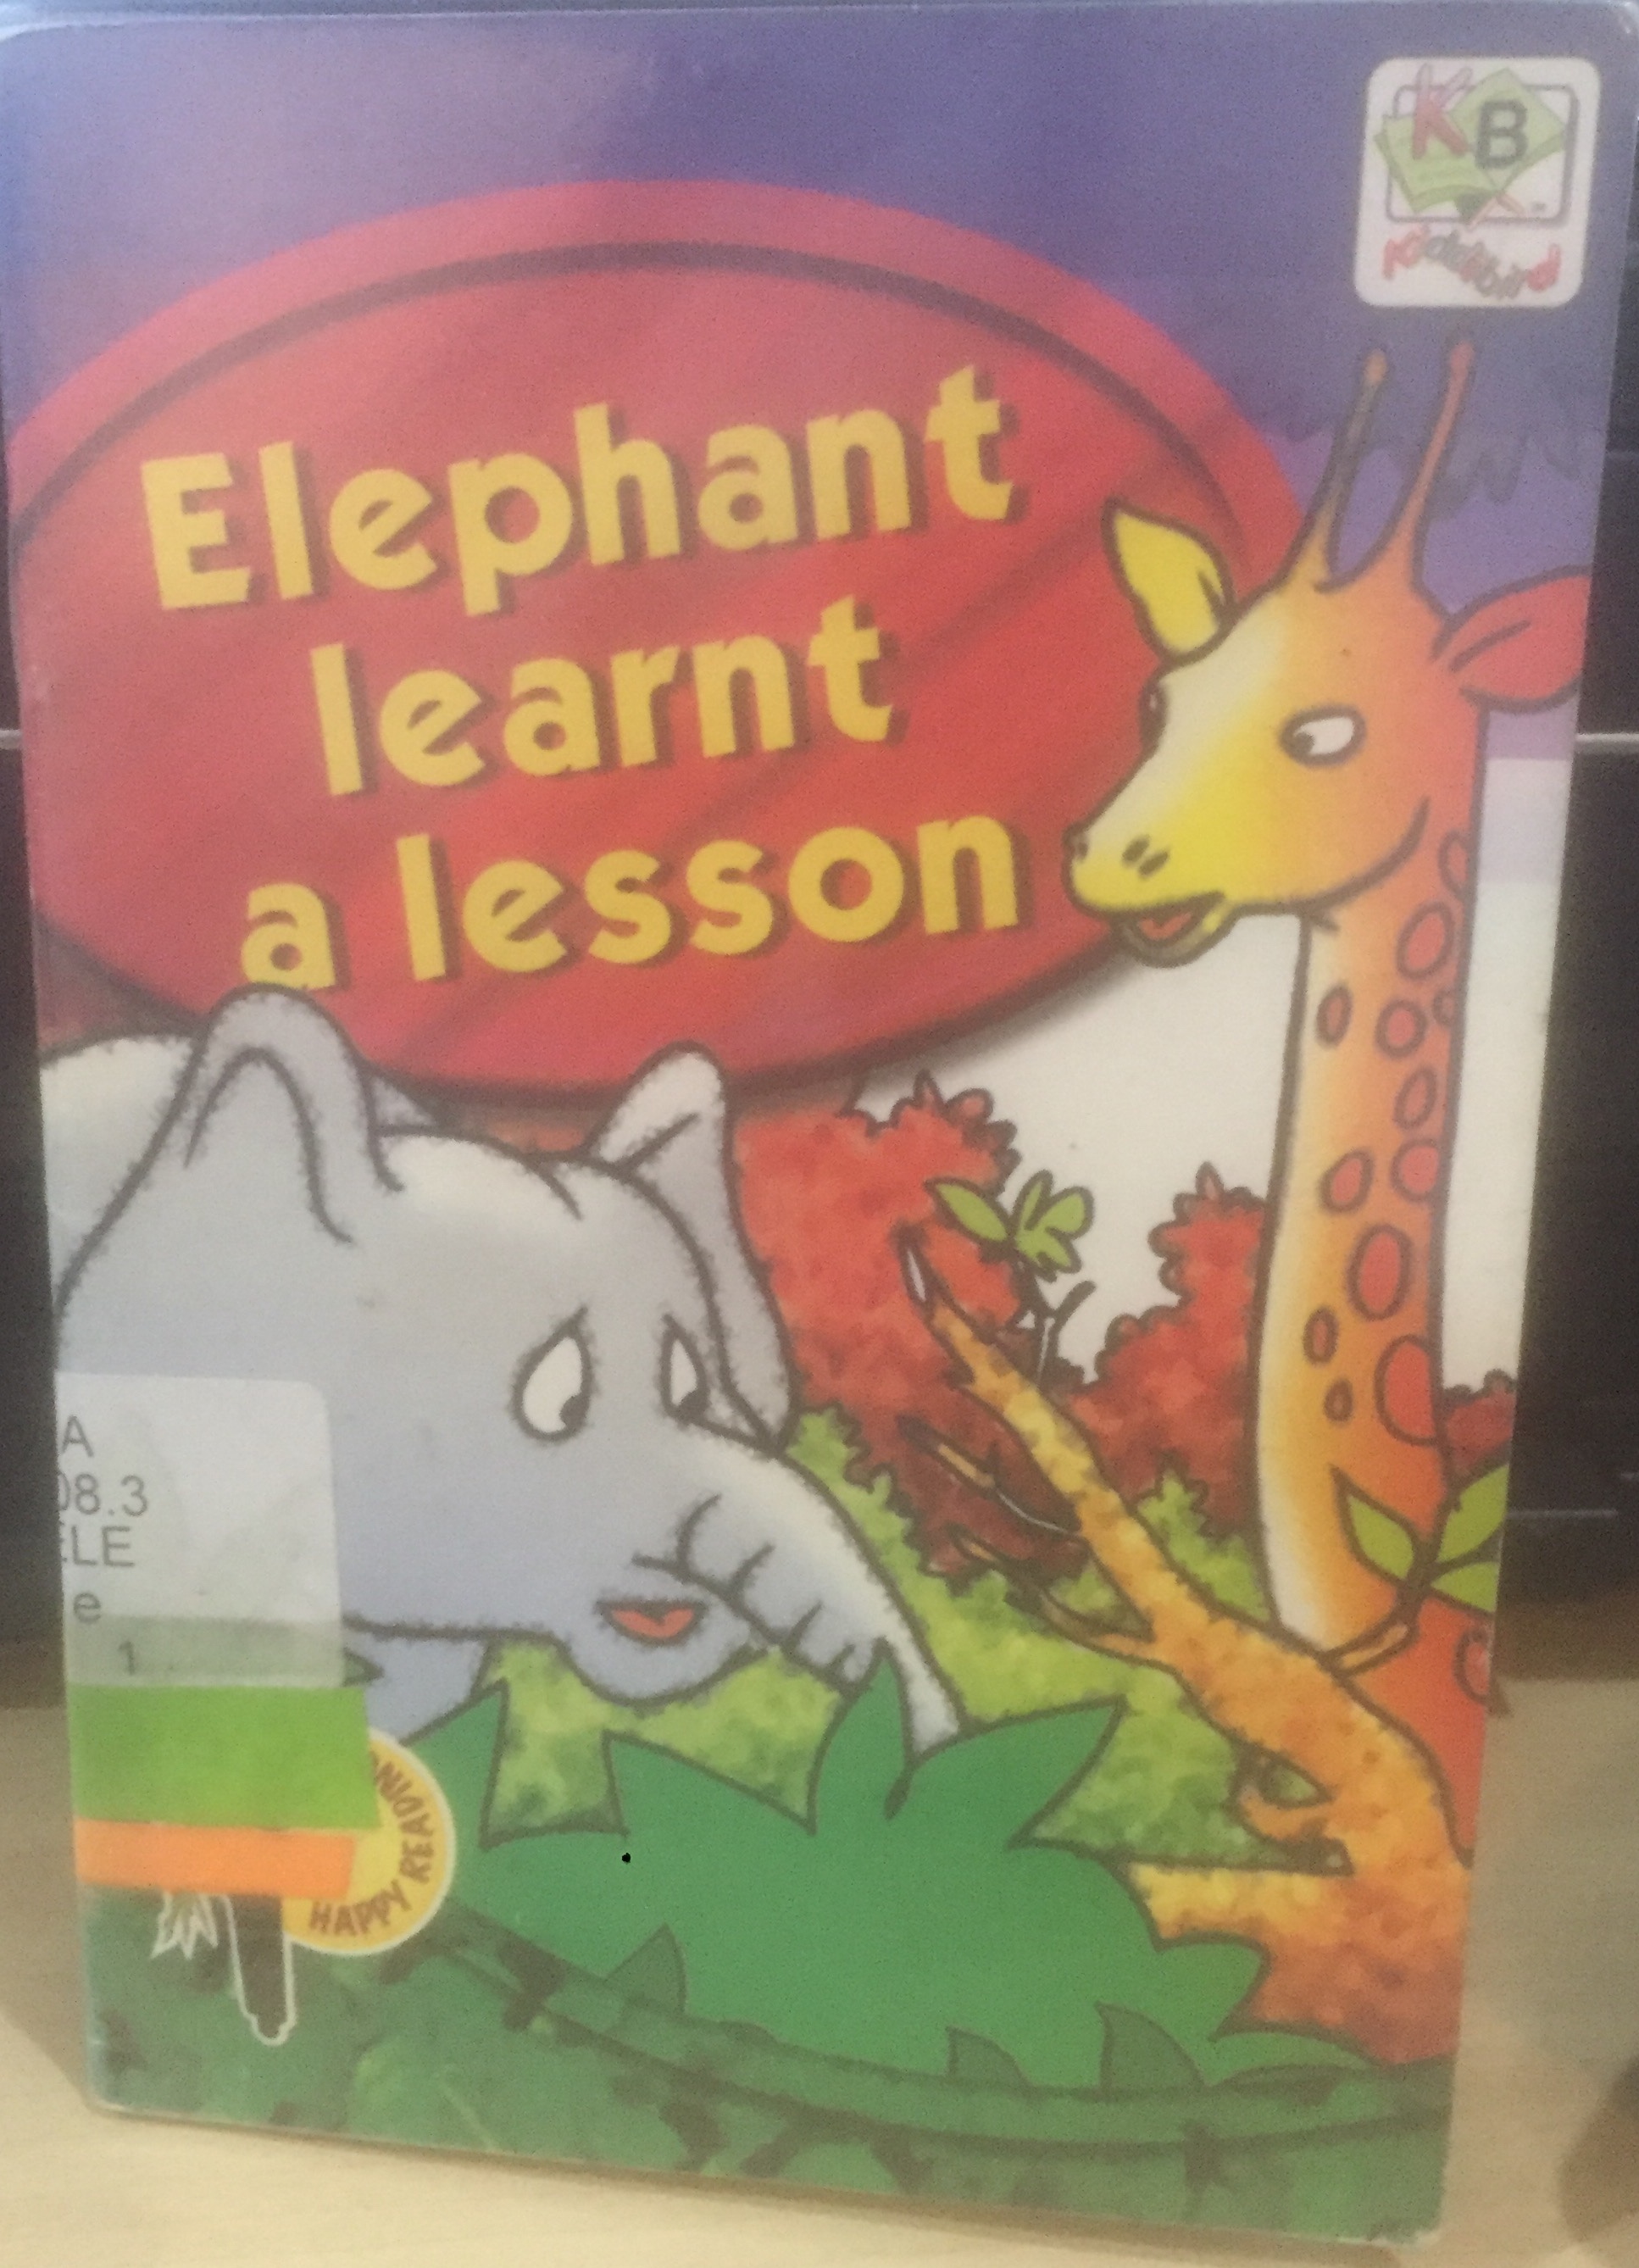 Elephant learnt a lesson